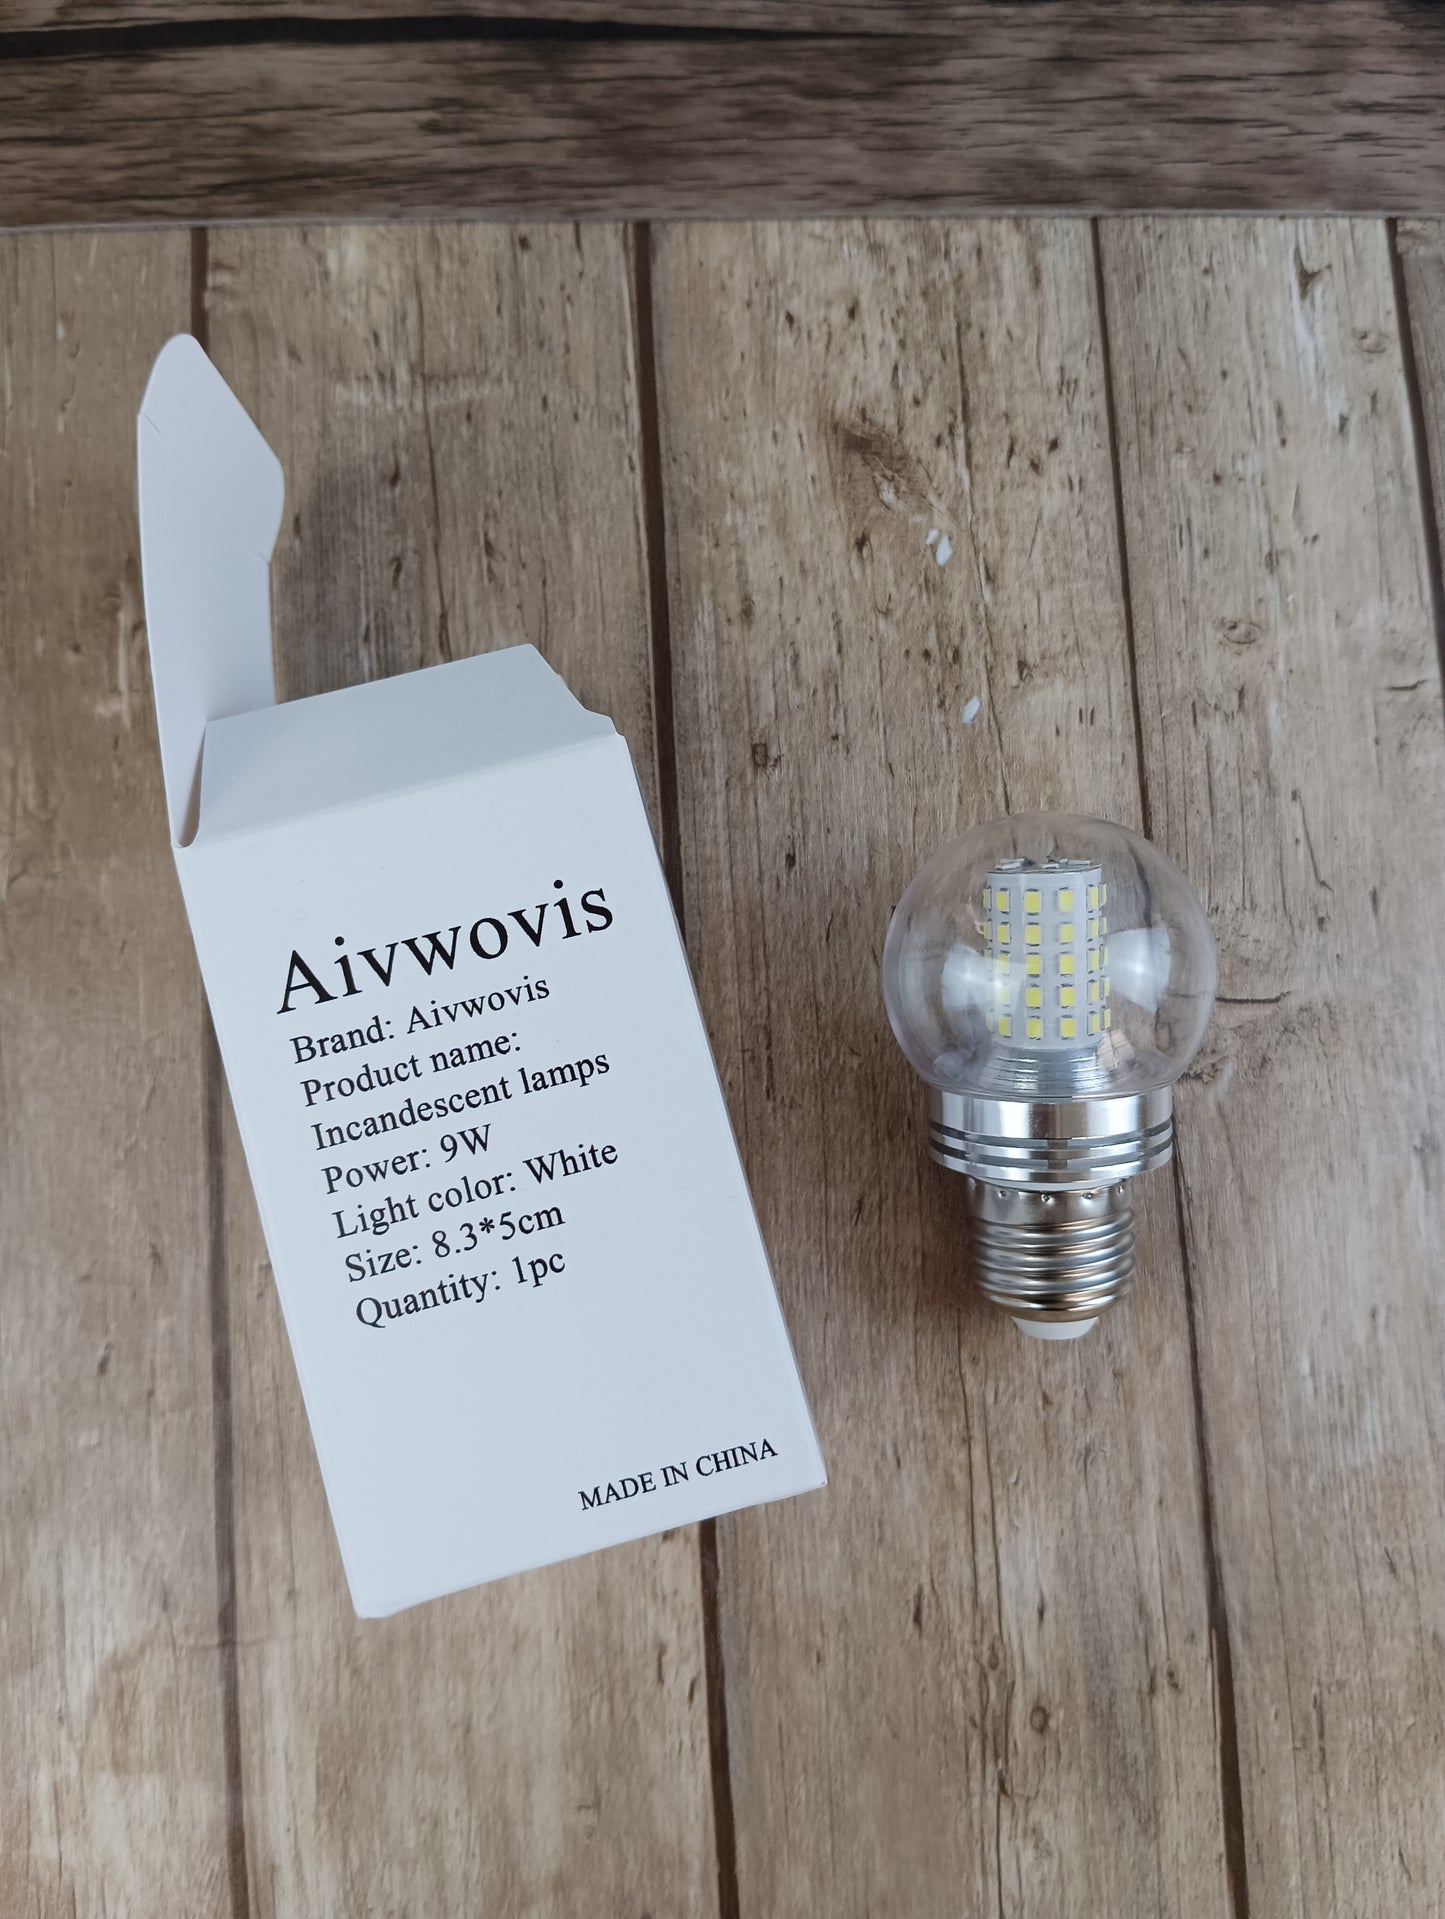 Aivwovis Incandescent lamps small round bulb magic bean chandelier light bulb screw-in warm white super bright color changing energy saving light bulb